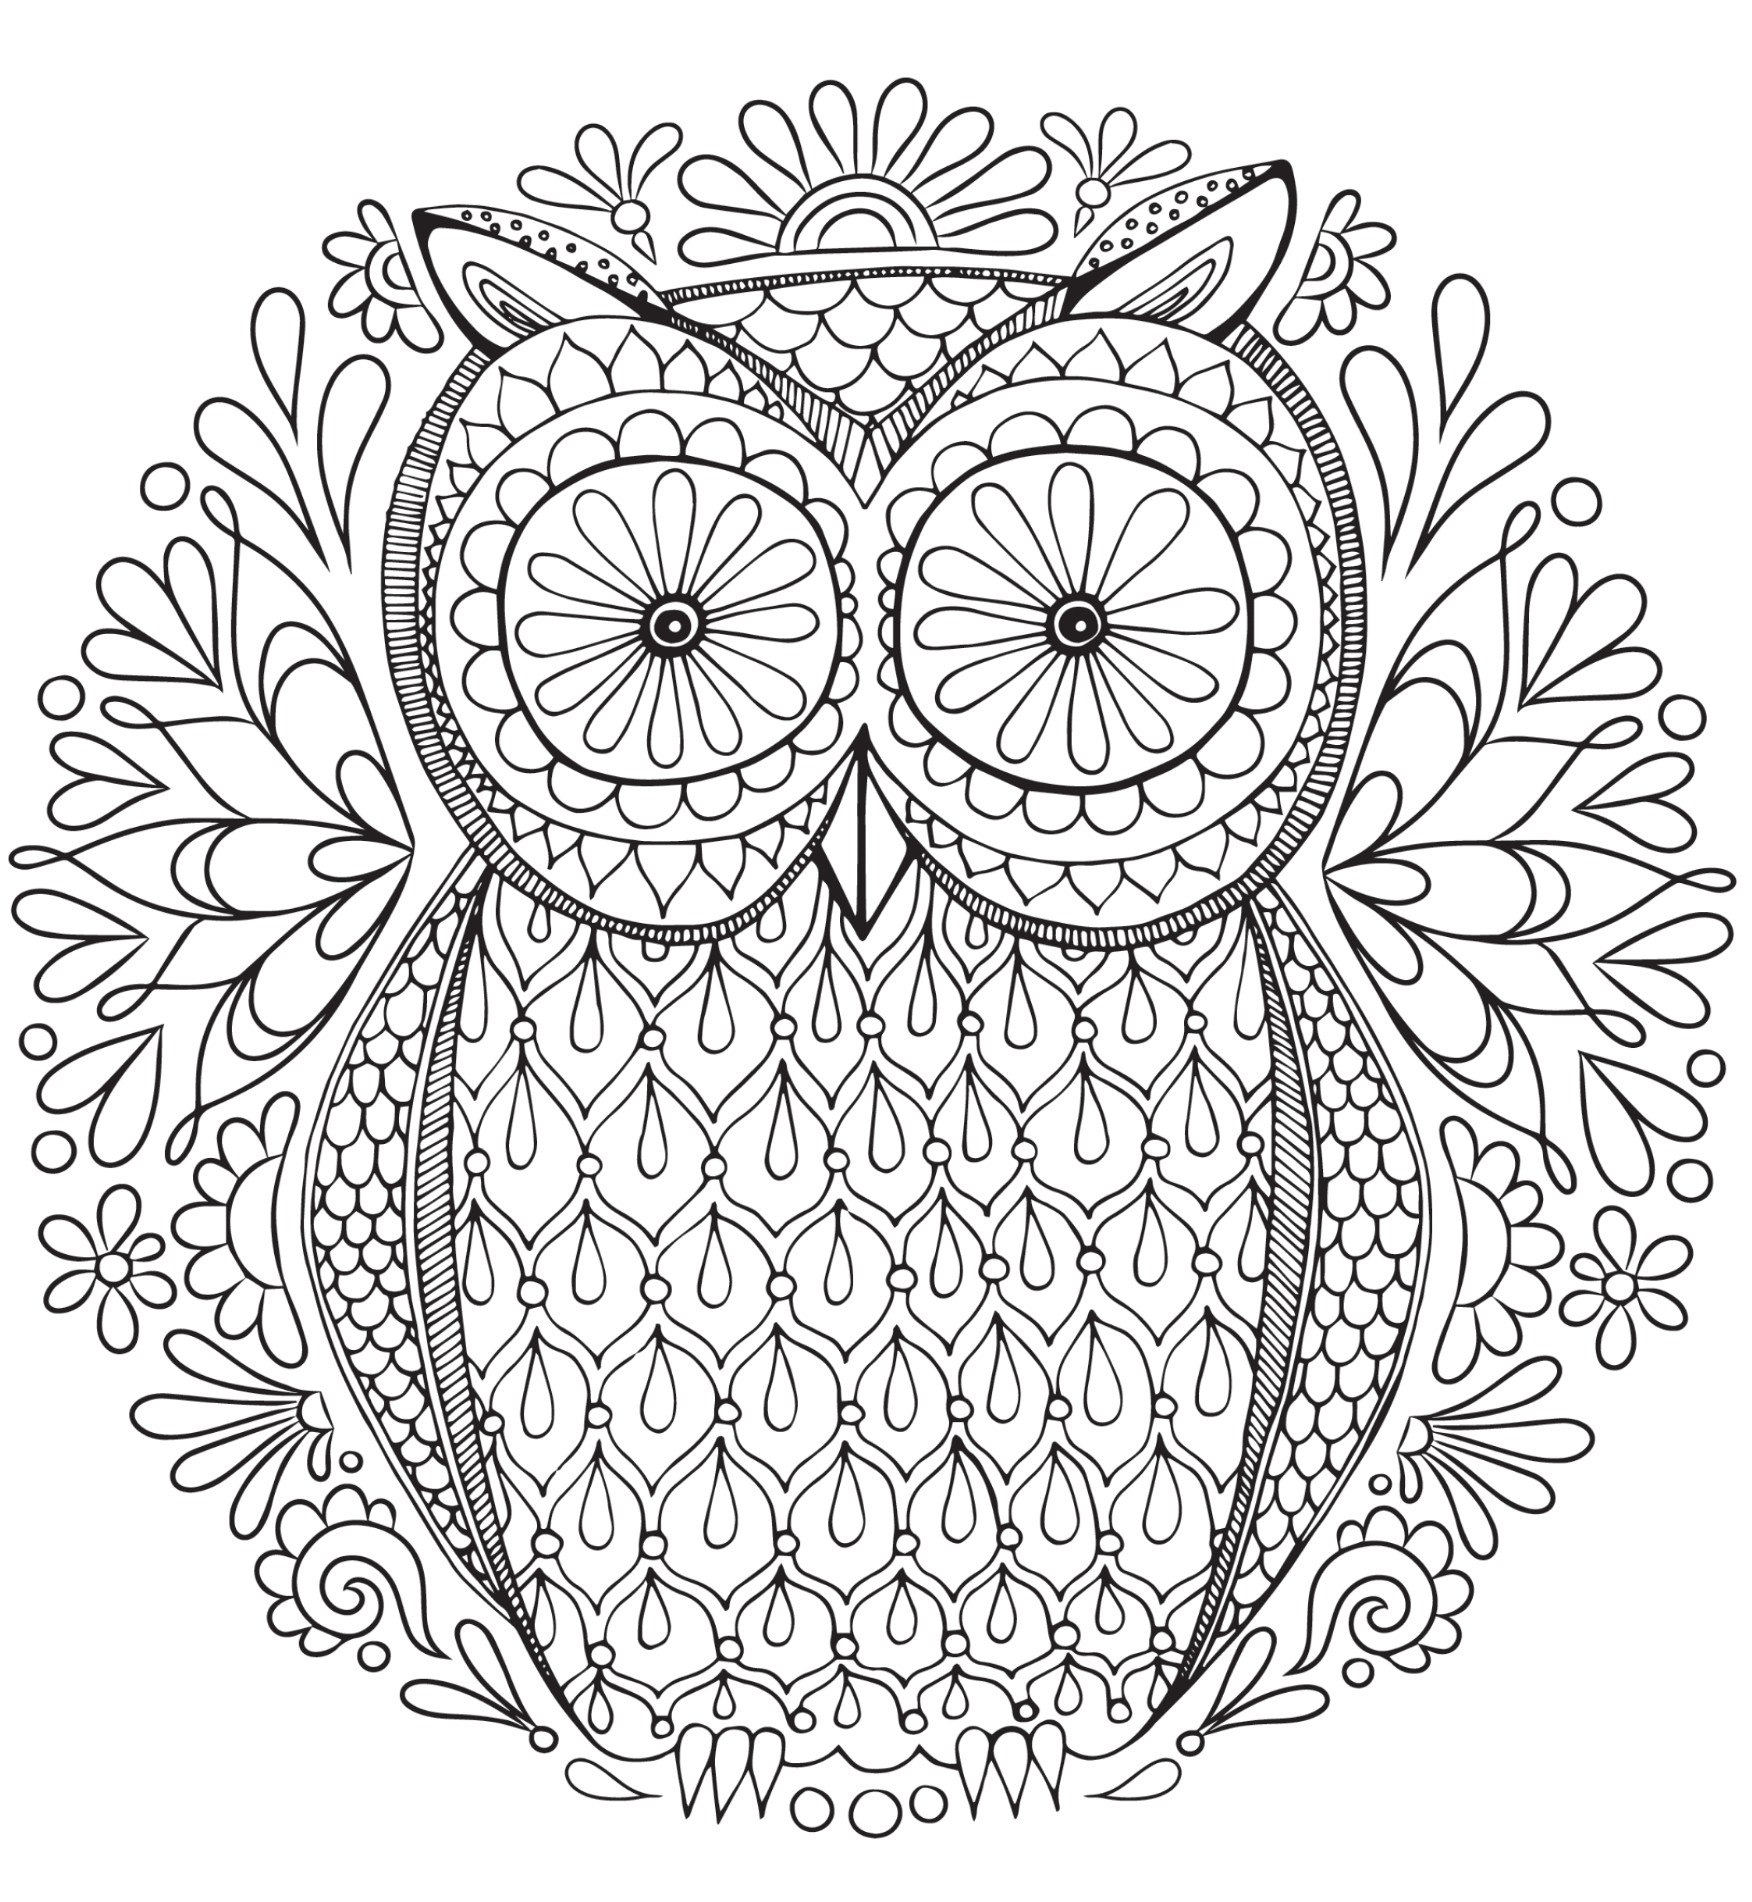 Printable Adult Coloring Pages
 20 Free Adult Colouring Pages The Organised Housewife